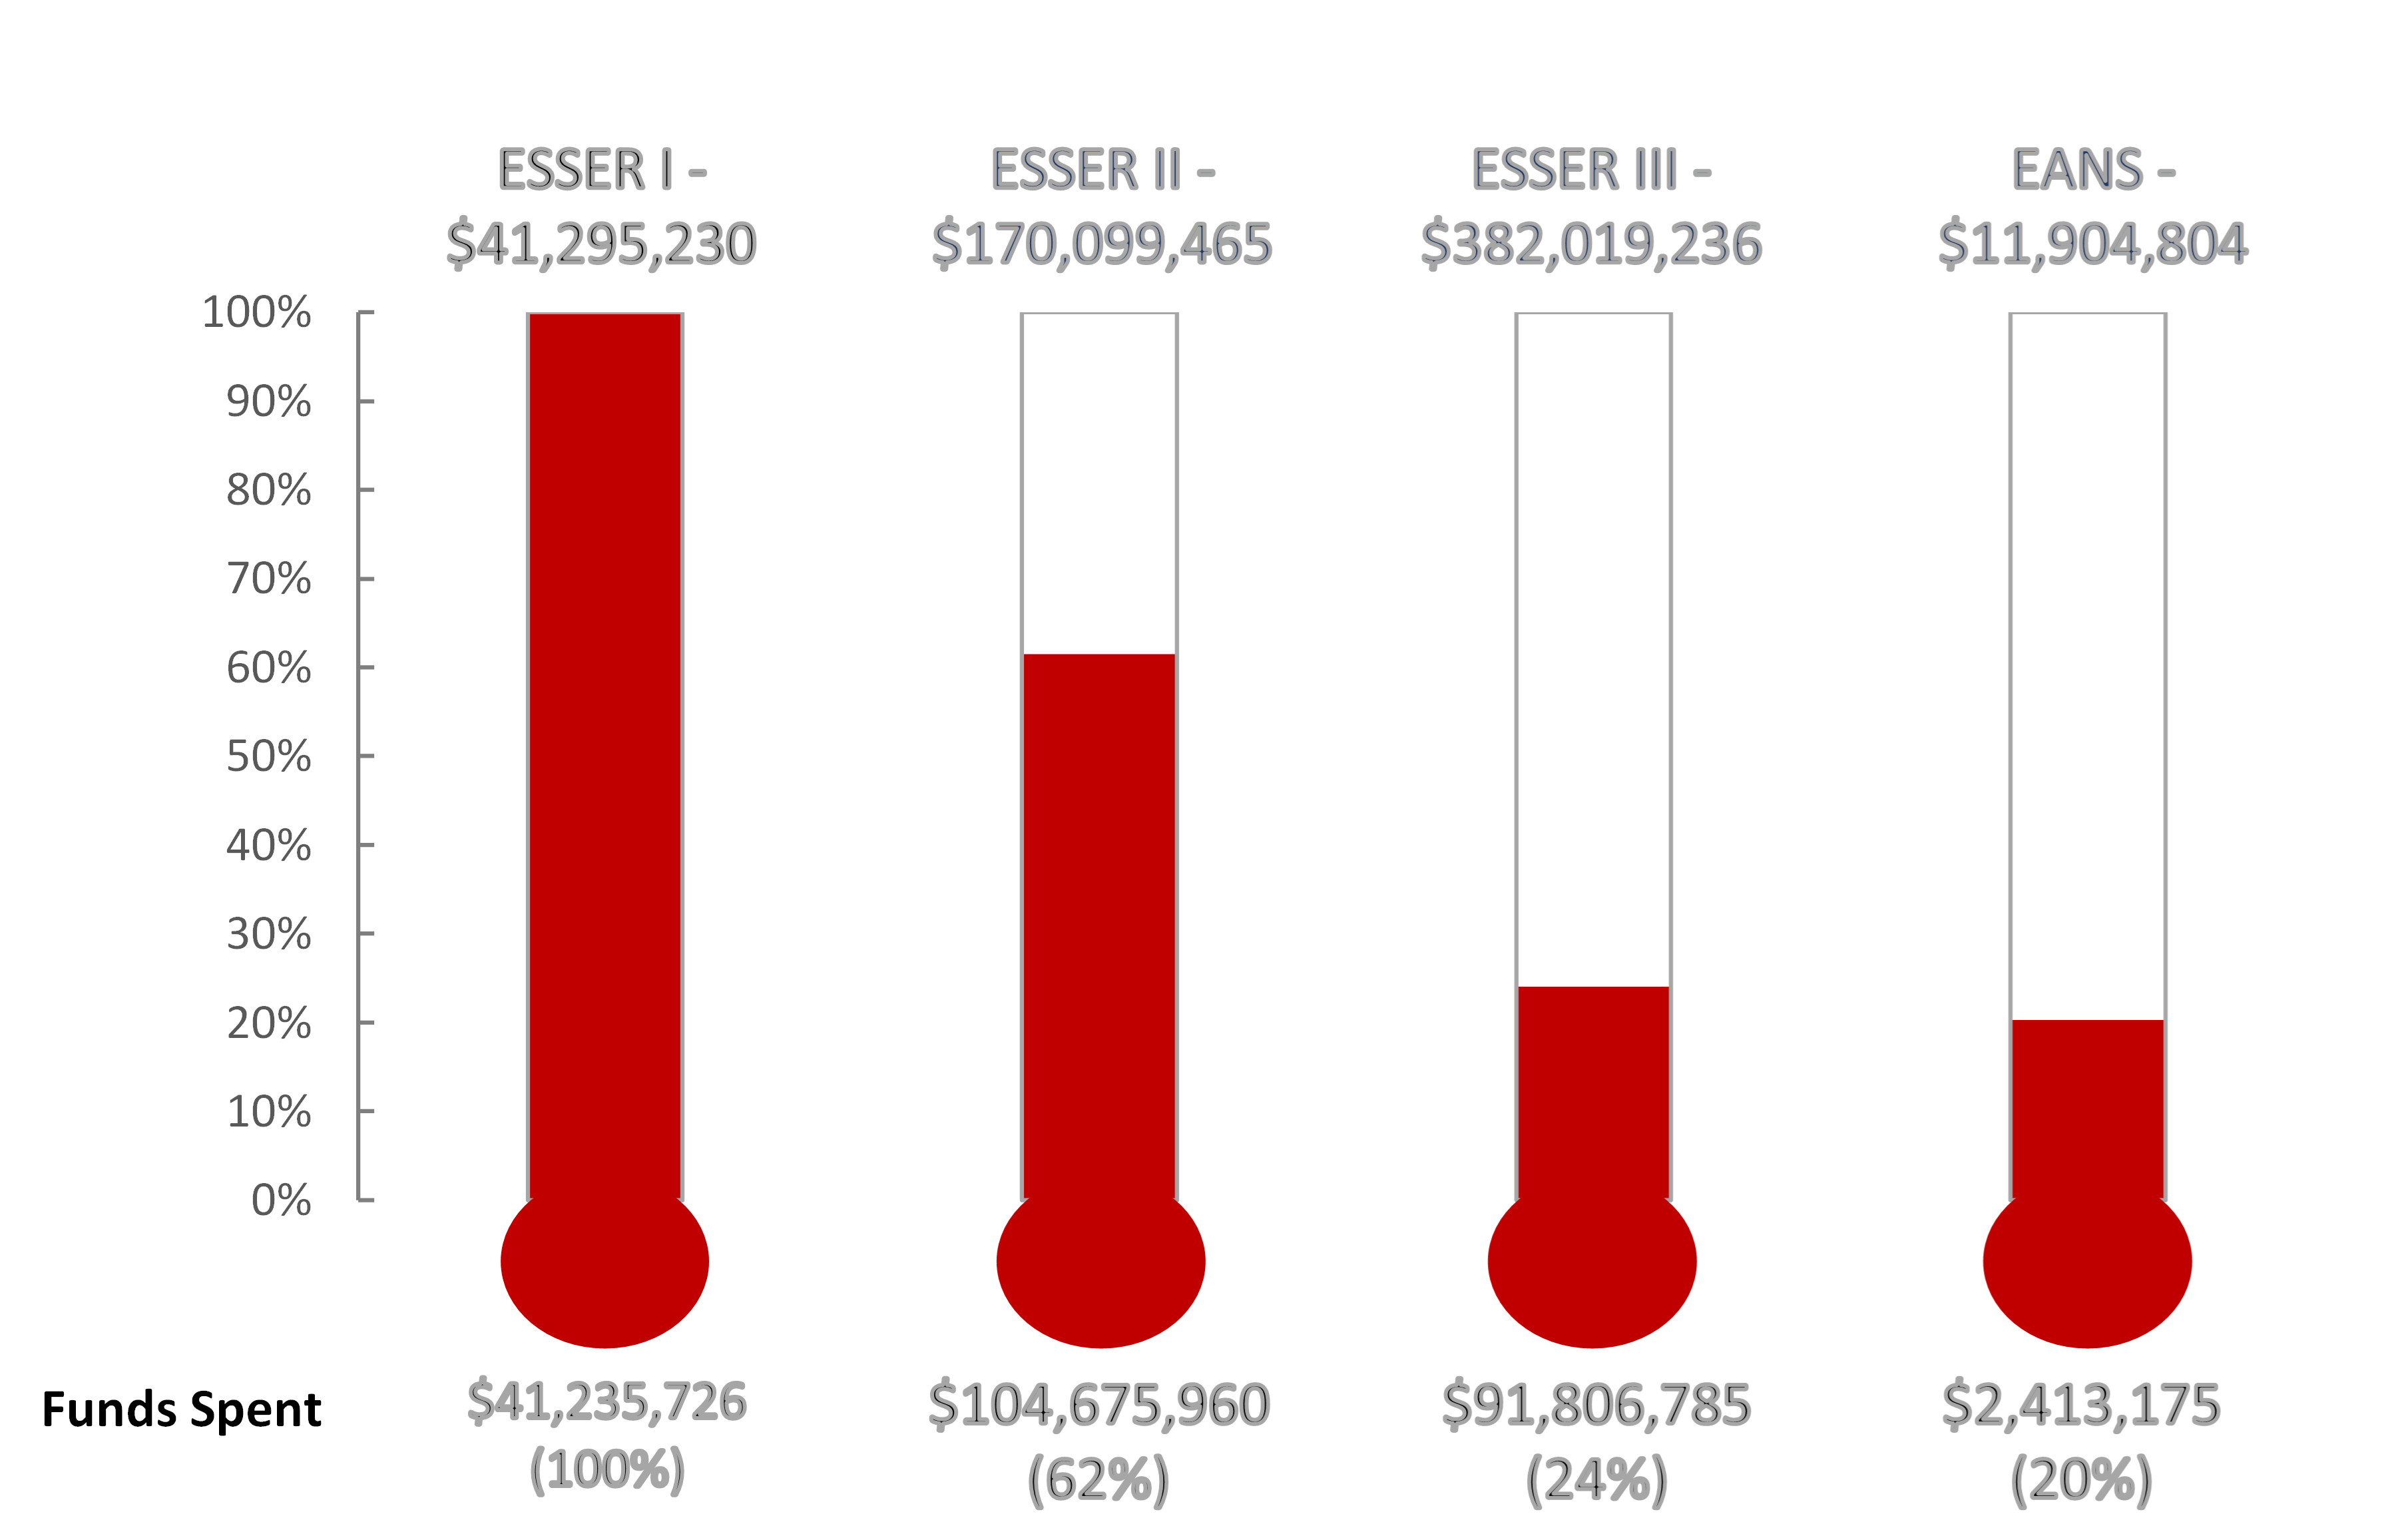 COVID-Related Funding Spent Graphic: ESSER I (Total= $41,295,230; $32,070,741 Spent; 78% Spent); ESSER II (Total= $170,099,465; $31,915,731 Spent; 19% Spent); ESSER III (Total= $382,019,236; $8,260,008 Spent; 2% Spent); EANS (Total=$24,679,709; $827,766  Spent, 3% Spent)